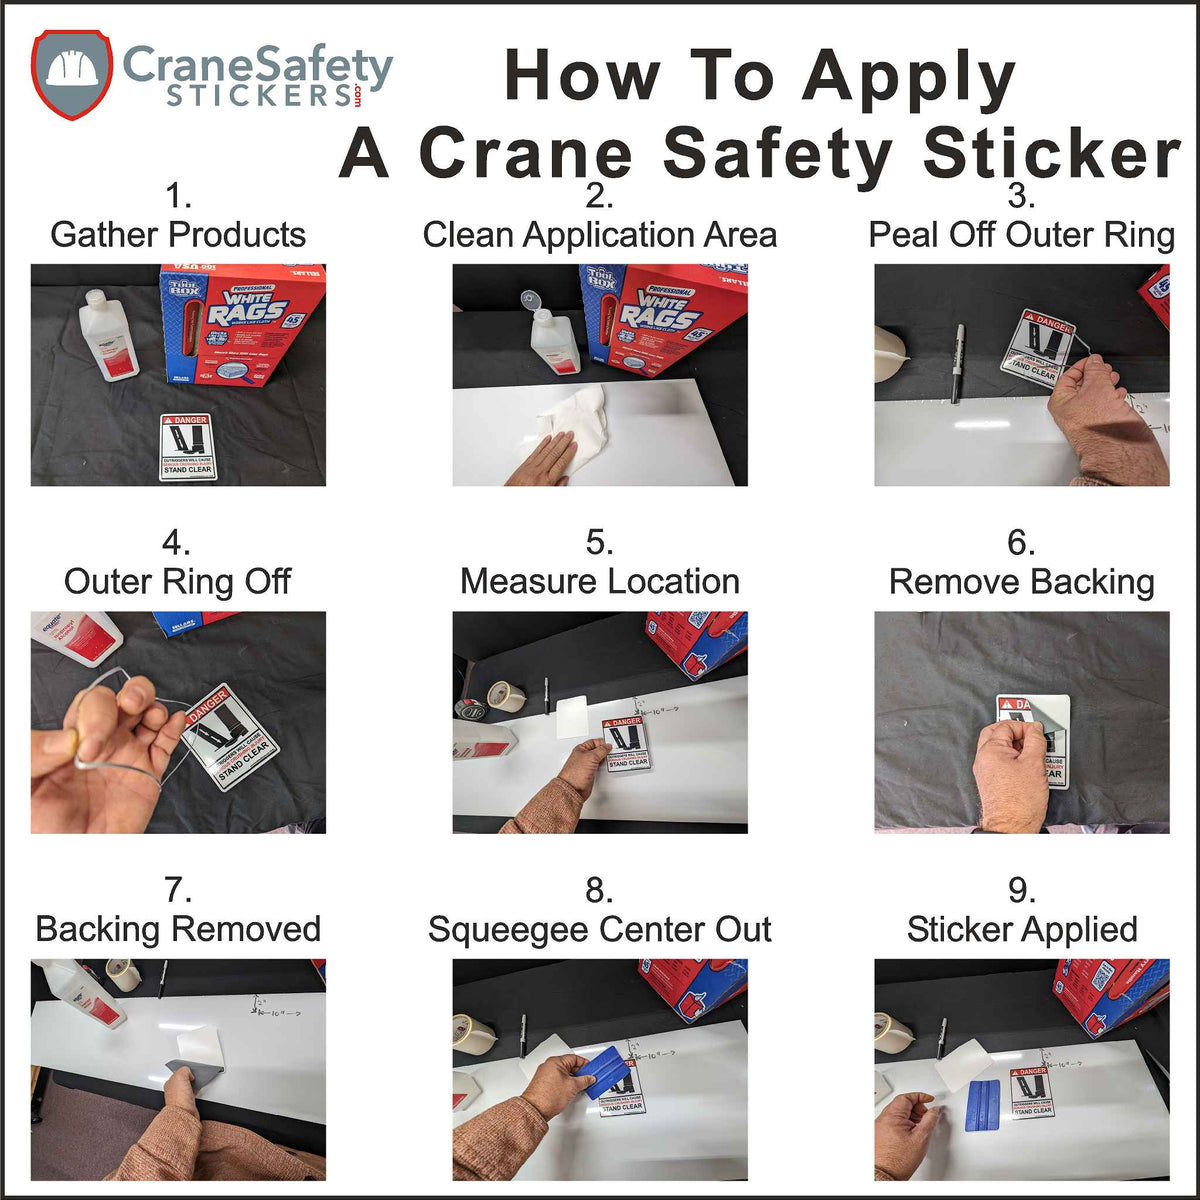 Directions on How To Apply Our Spanish Crane Safety Sticker Operate Safely, Power Line Clearance, Two Block.